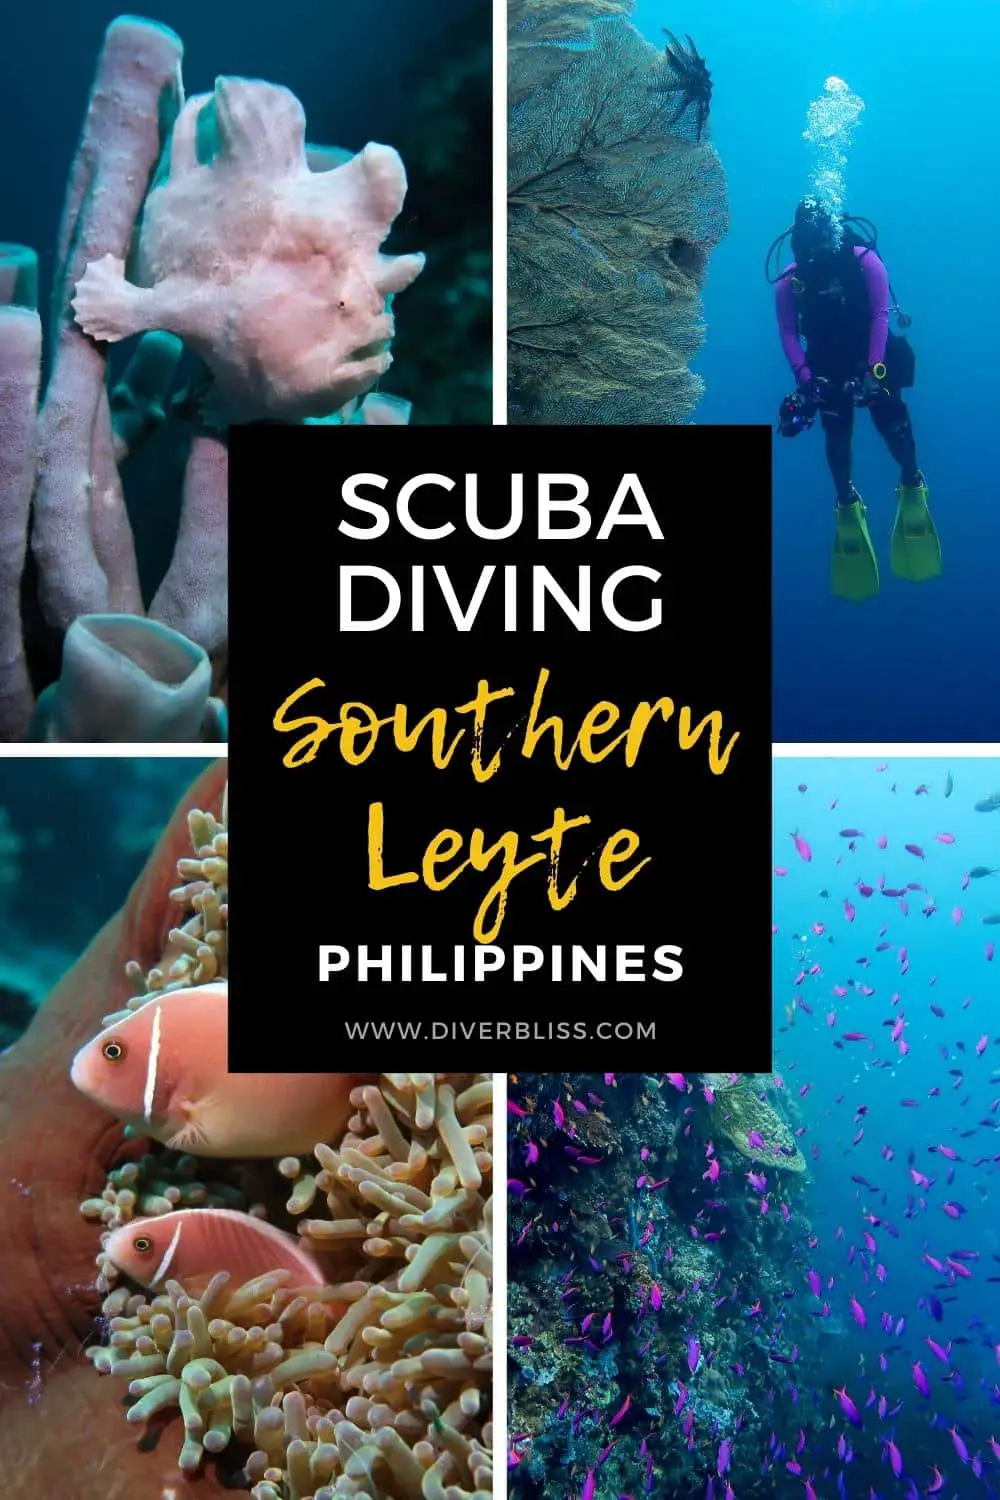 scuba diving southern leyte philippines